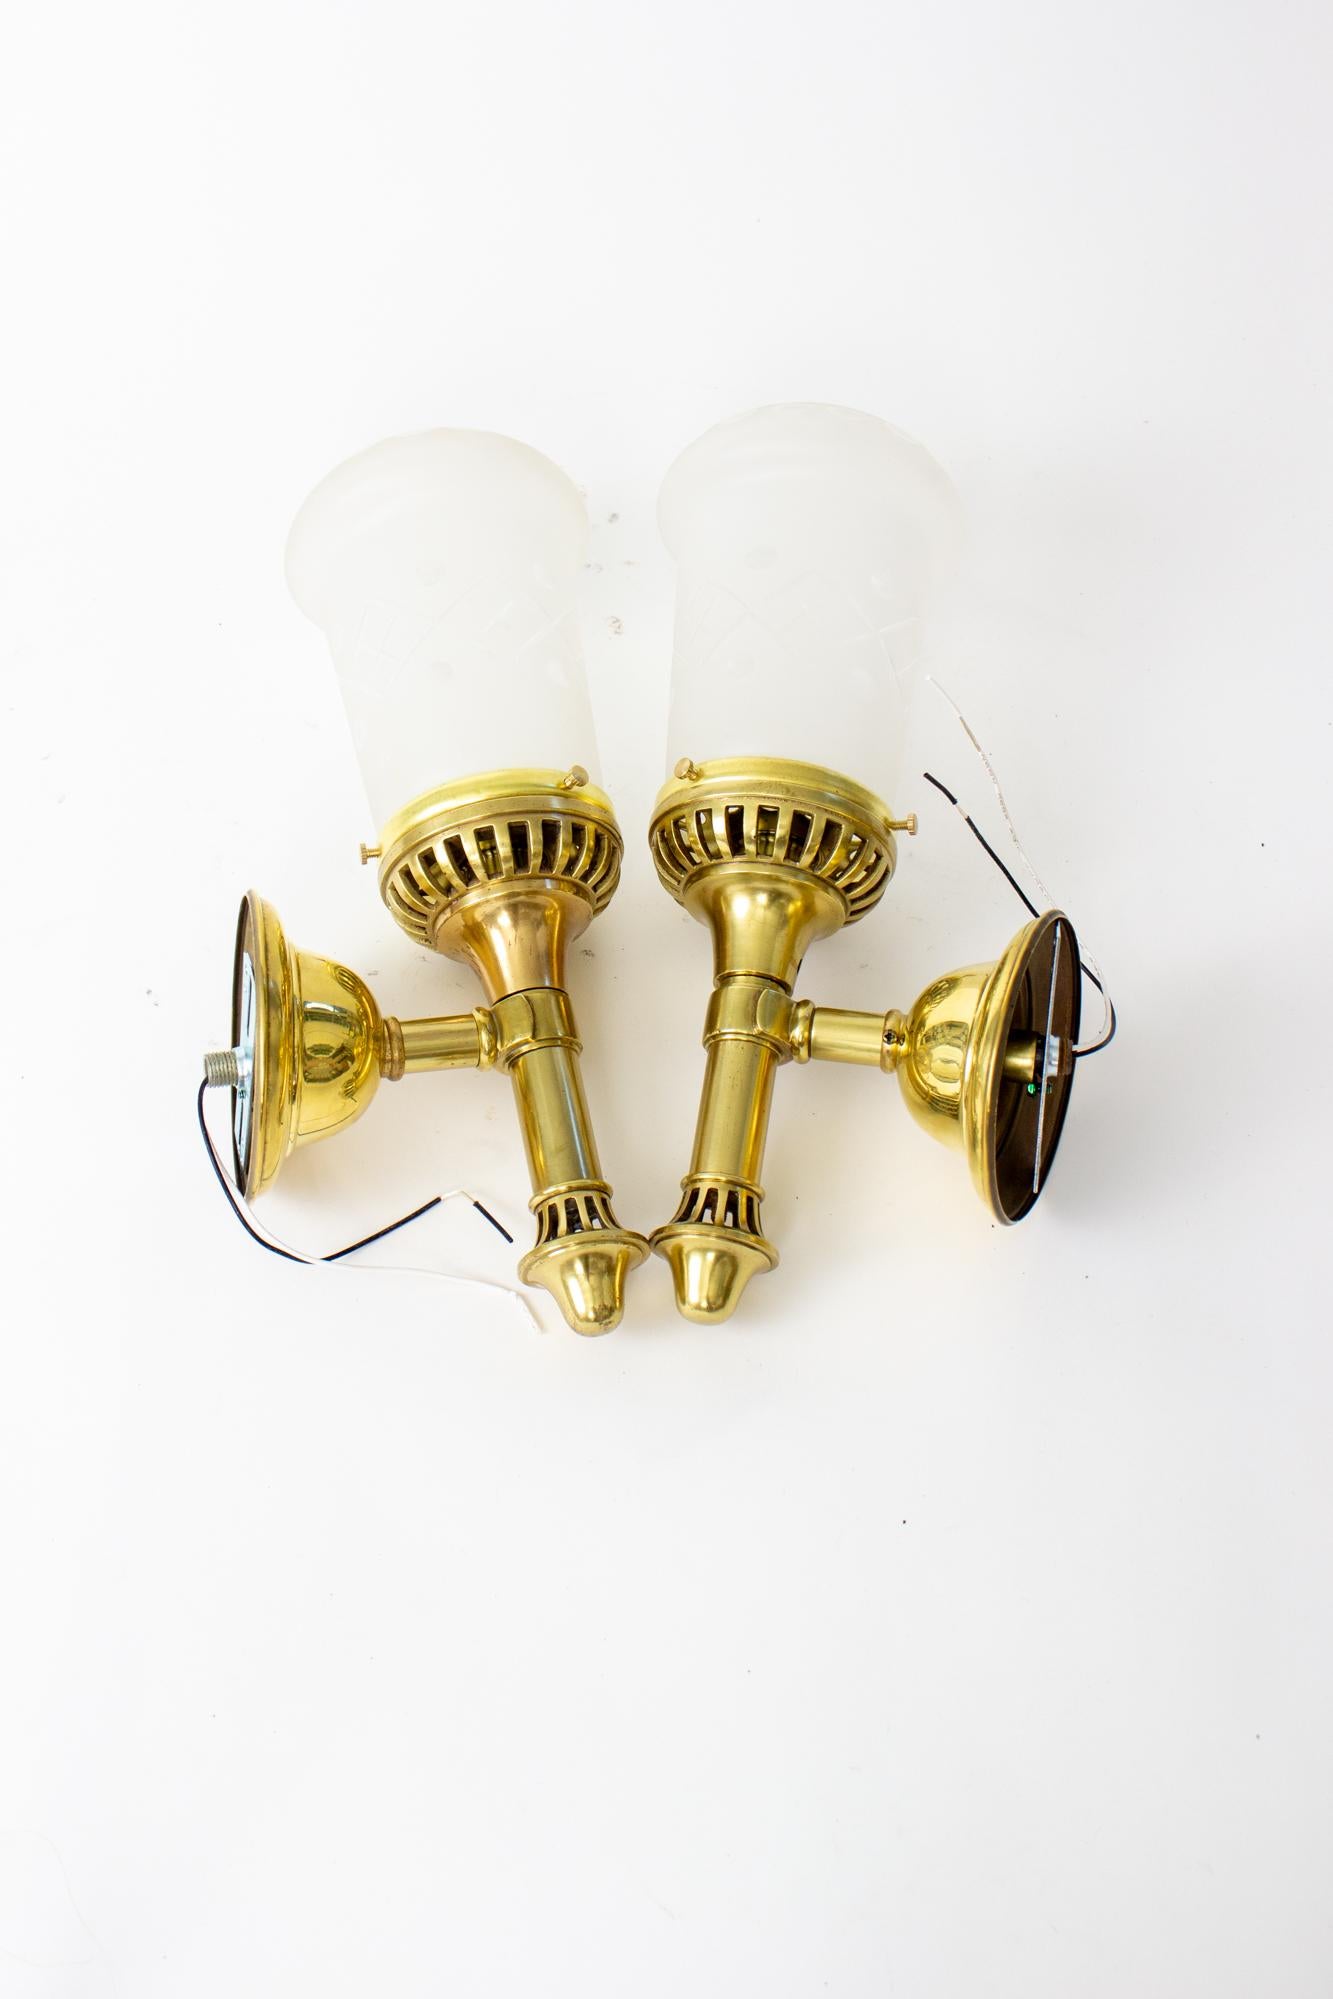 Early 20th Century brass sconces with cut glass shades. In the shape of an argand lamp, but was likely originally electric. Frosted and cut glass shades. C. 1910 American. Polished brass metals. Rewired and ready for installation in the US. Glass is